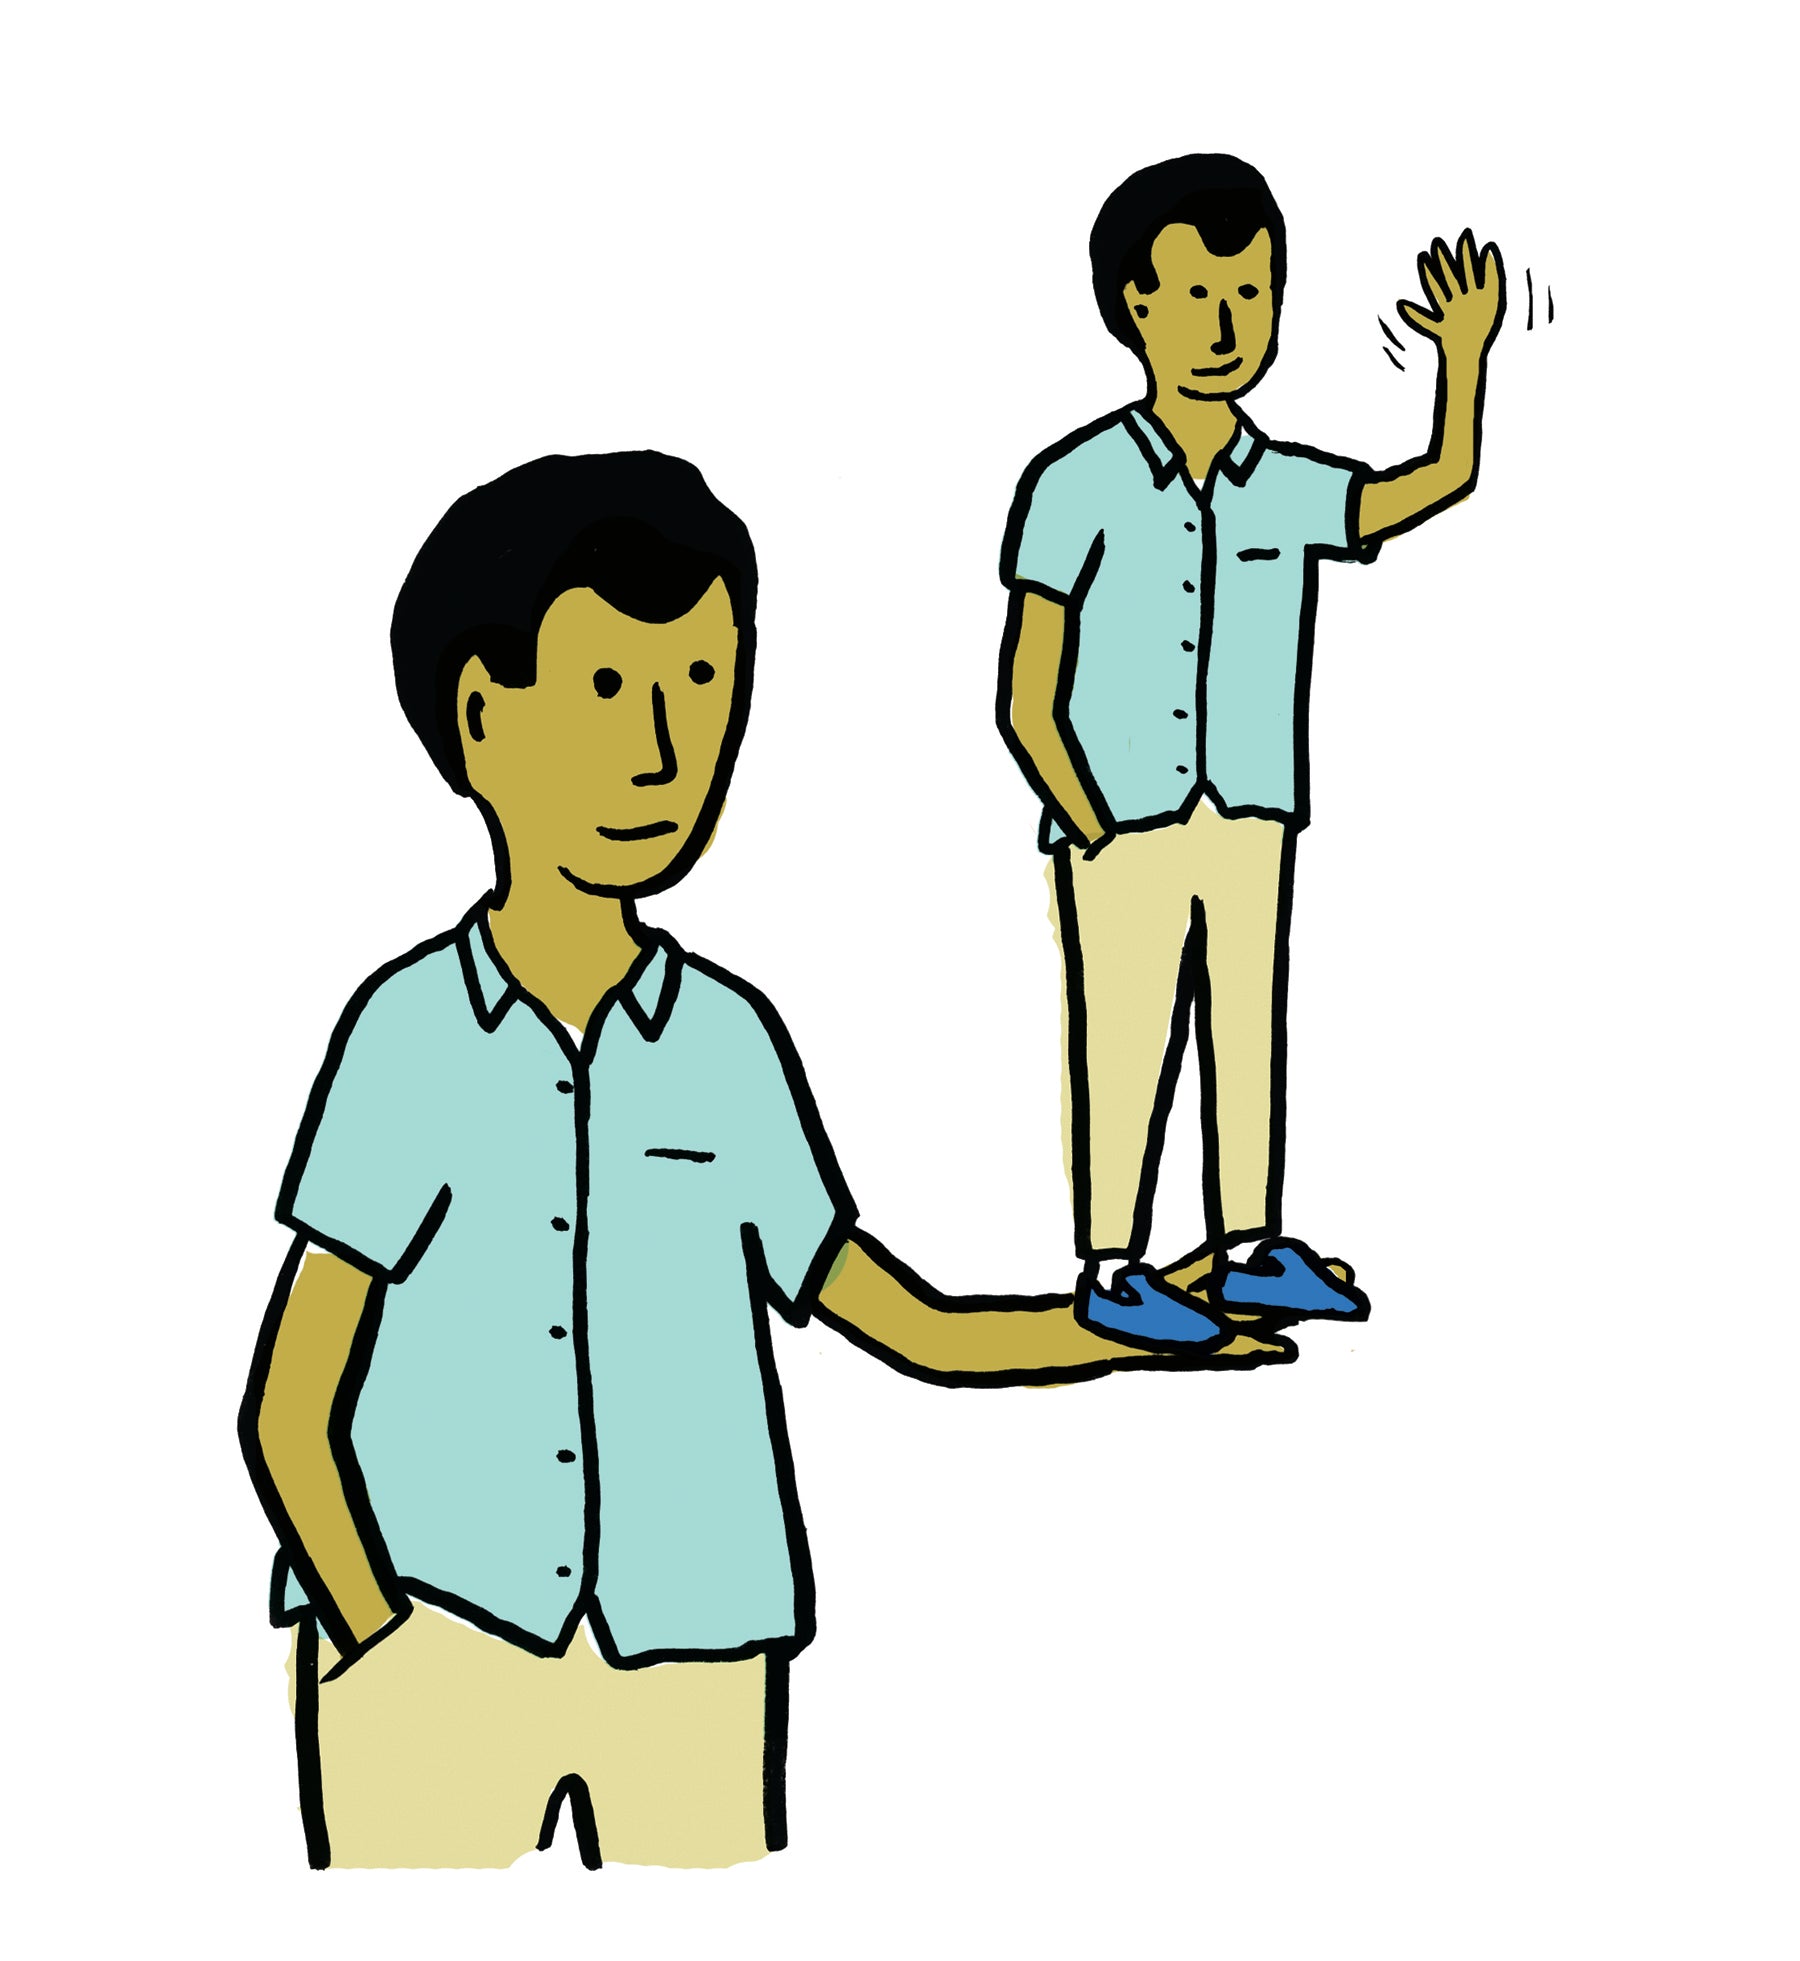 Illustration of an ethnically ambiguous teenager, holding a mini version of himself in his hand, as a metaphor for introducing himself. 